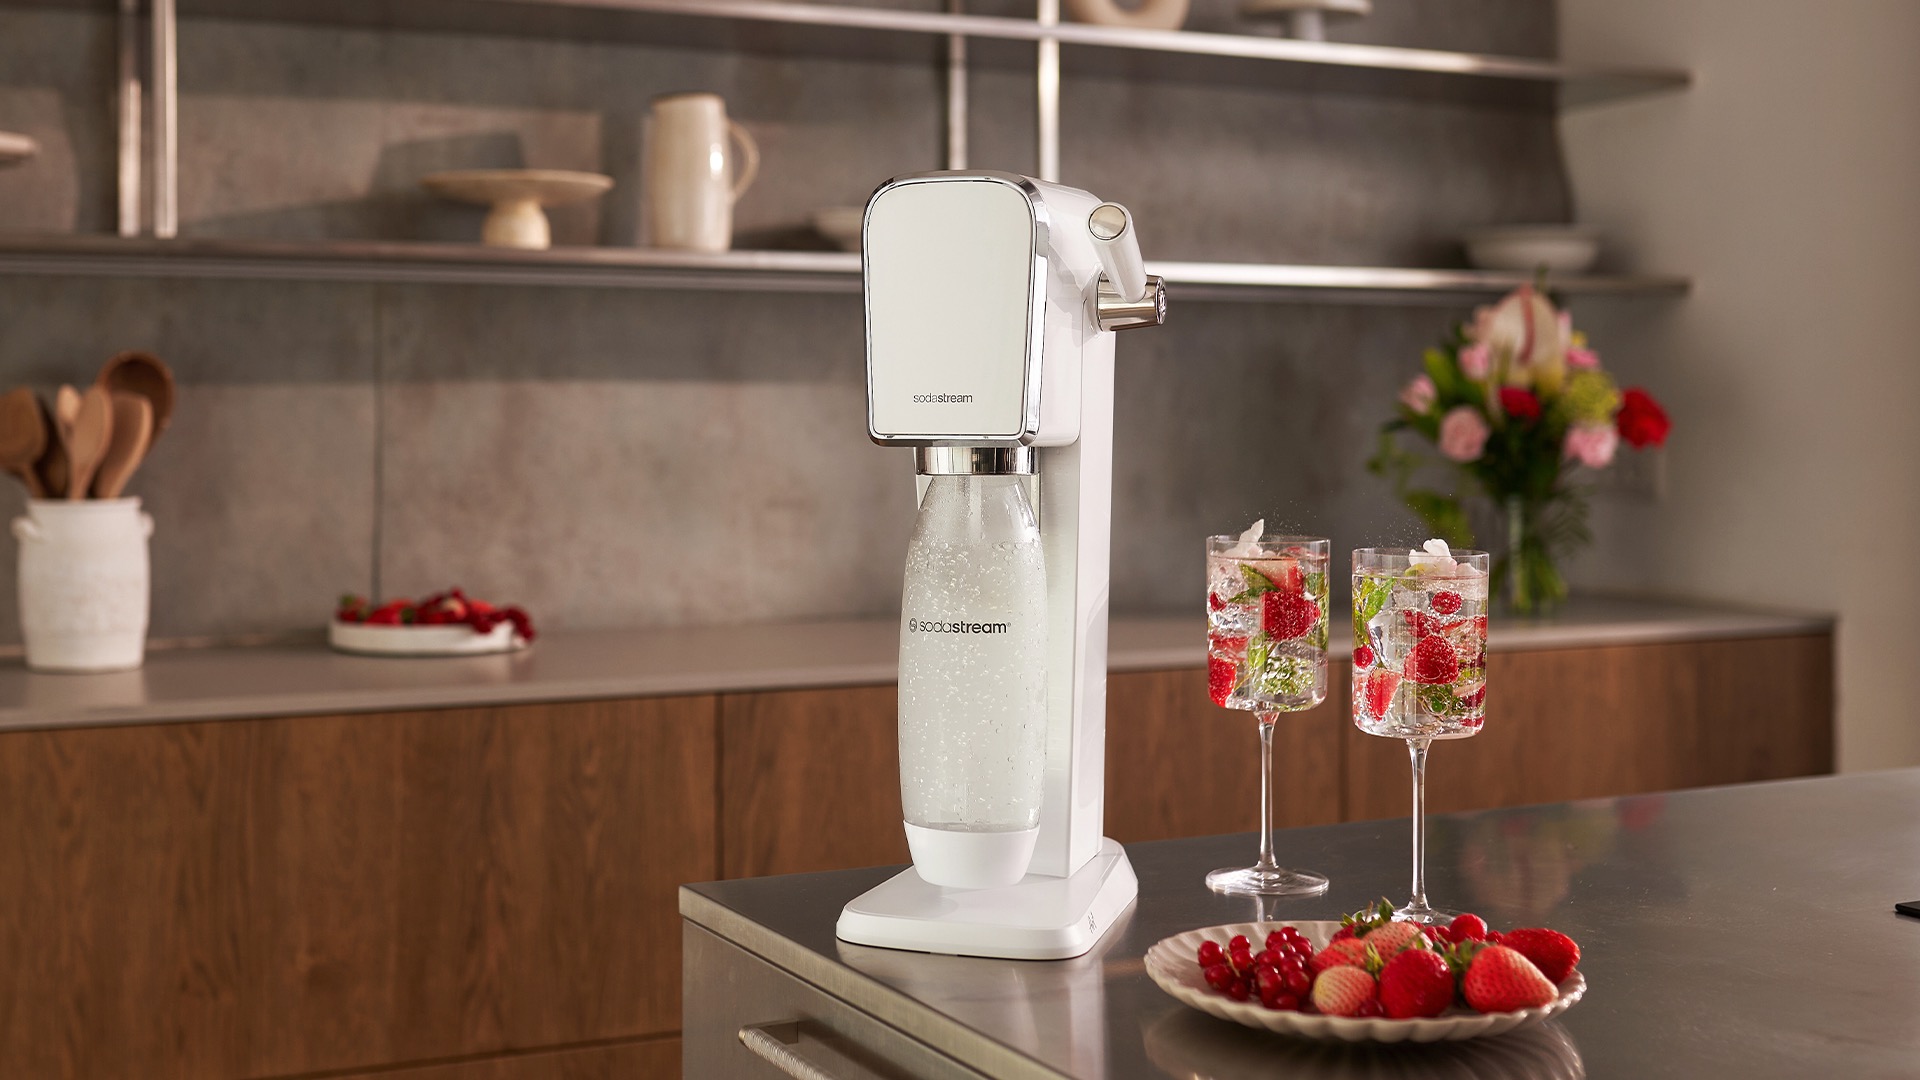 SodaStream Art Sparkling Water Maker, sitting on a kitchen benchtop beside two glasses of sparkling water filled with strawberries